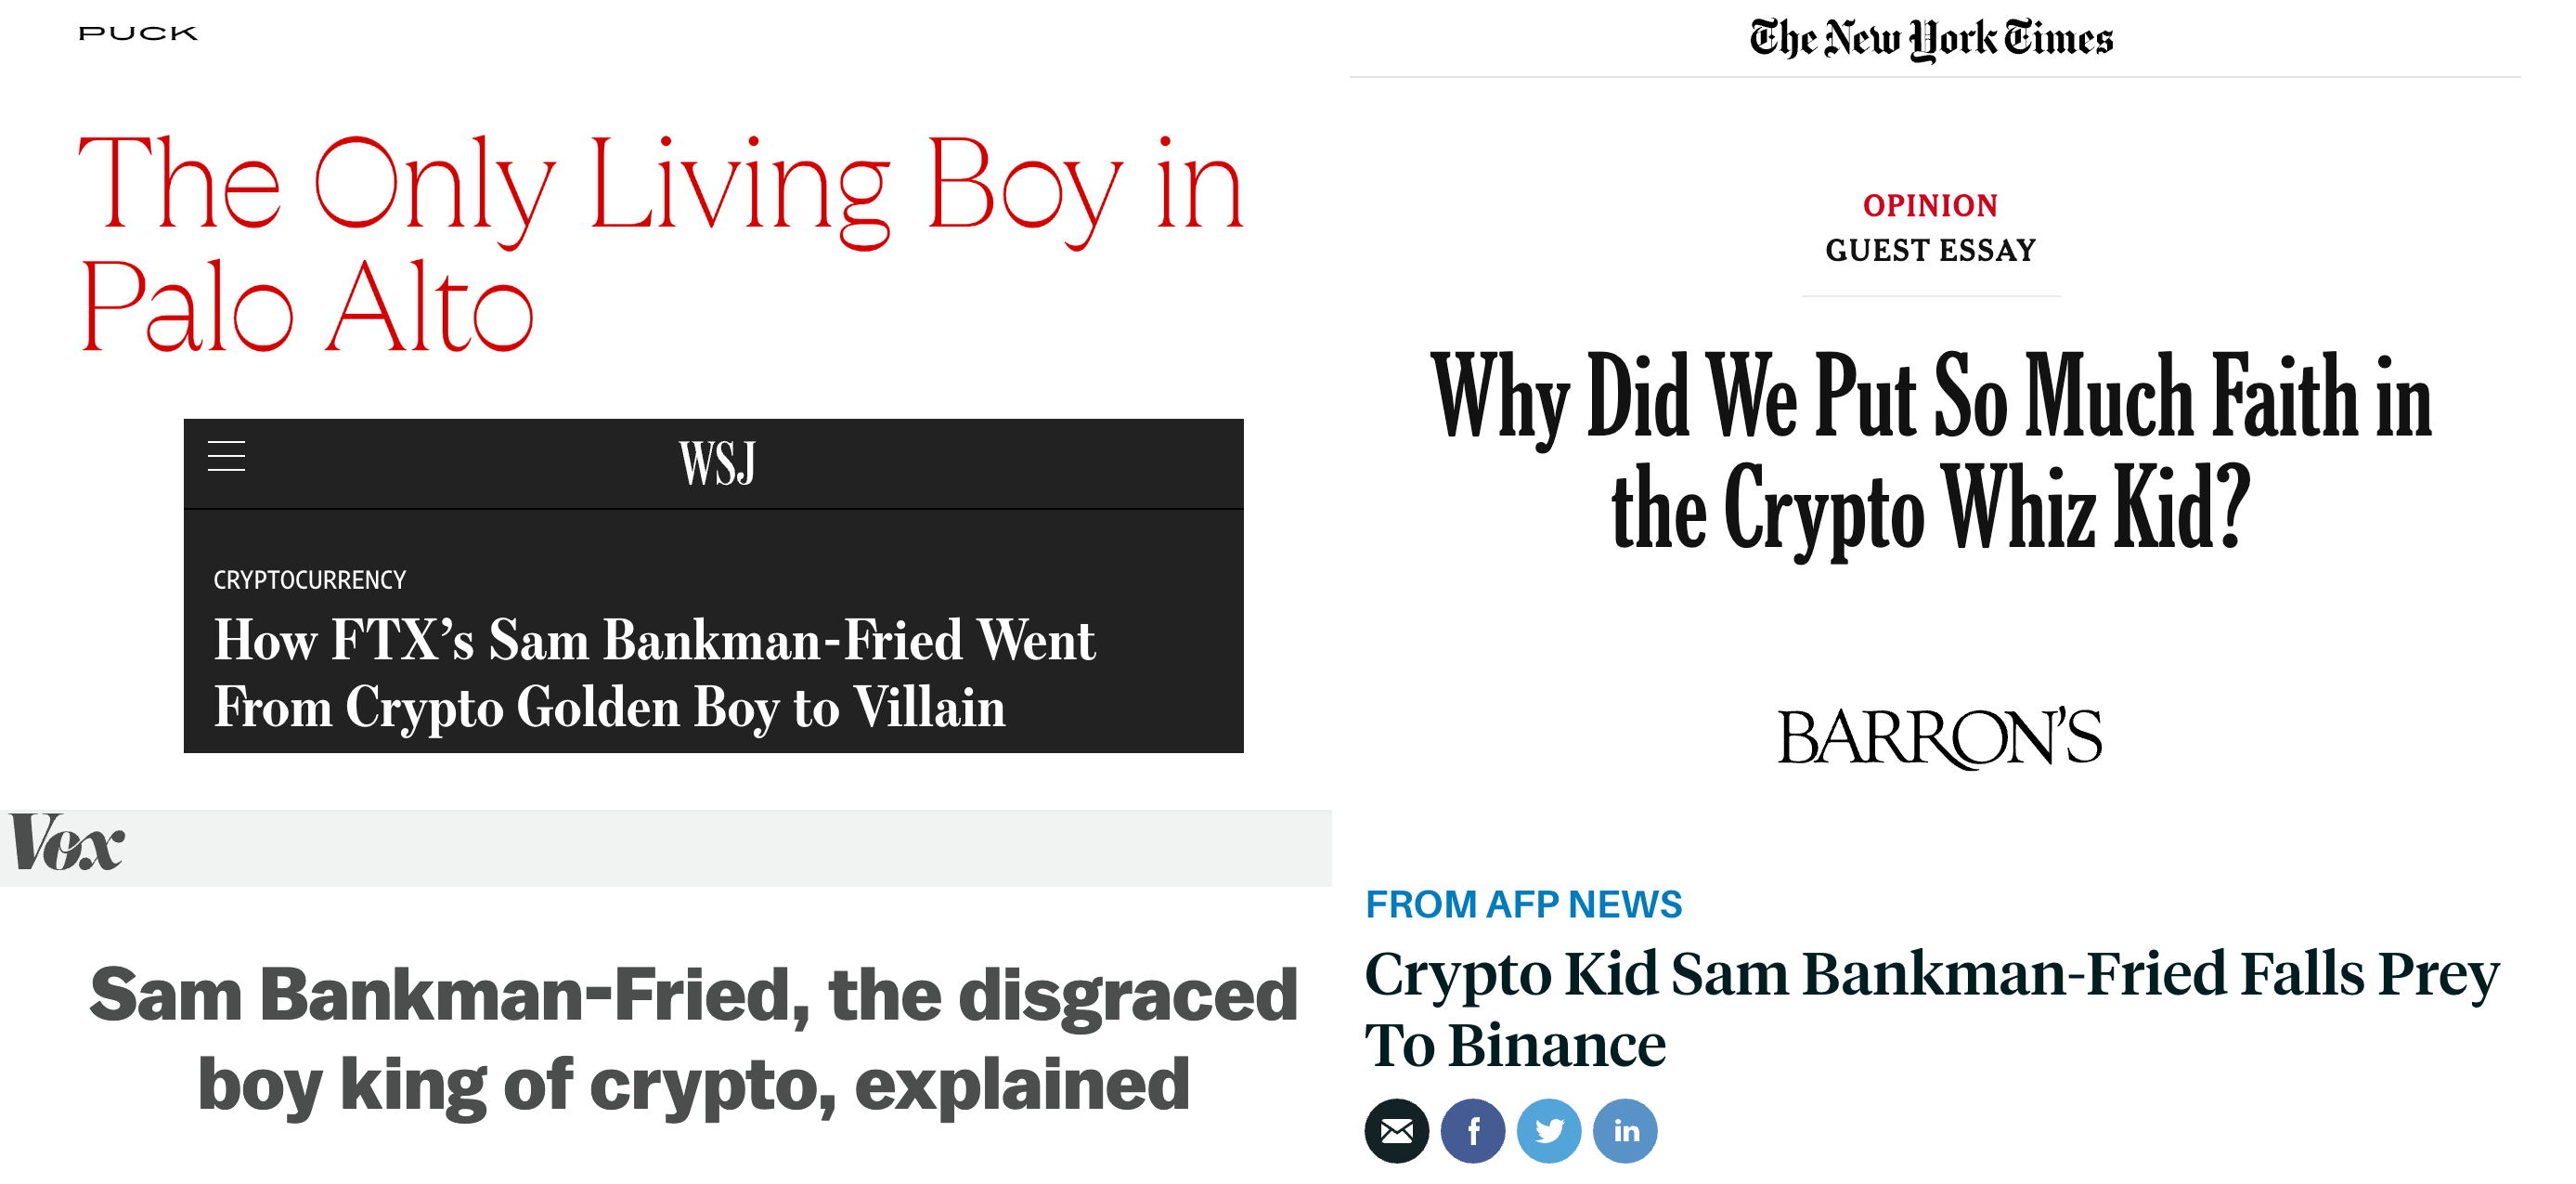 Collage of news headlines. Puck News: "The Only Living Boy in Palo Alto". The New York Times: "Why Did We Put So Much Faith in the Crypto Whiz Kid?" Wall Street Journal: "How FTX's Sam Bankman-Fried Went From Crypto Golden Boy to Villain". Barron's via AFP: "Crypto Kid Sam Bankman-Fried Falls Prey to Binance". Vox: "Sam Bankman-Fried, the disgraced boy king of crypto, explained".